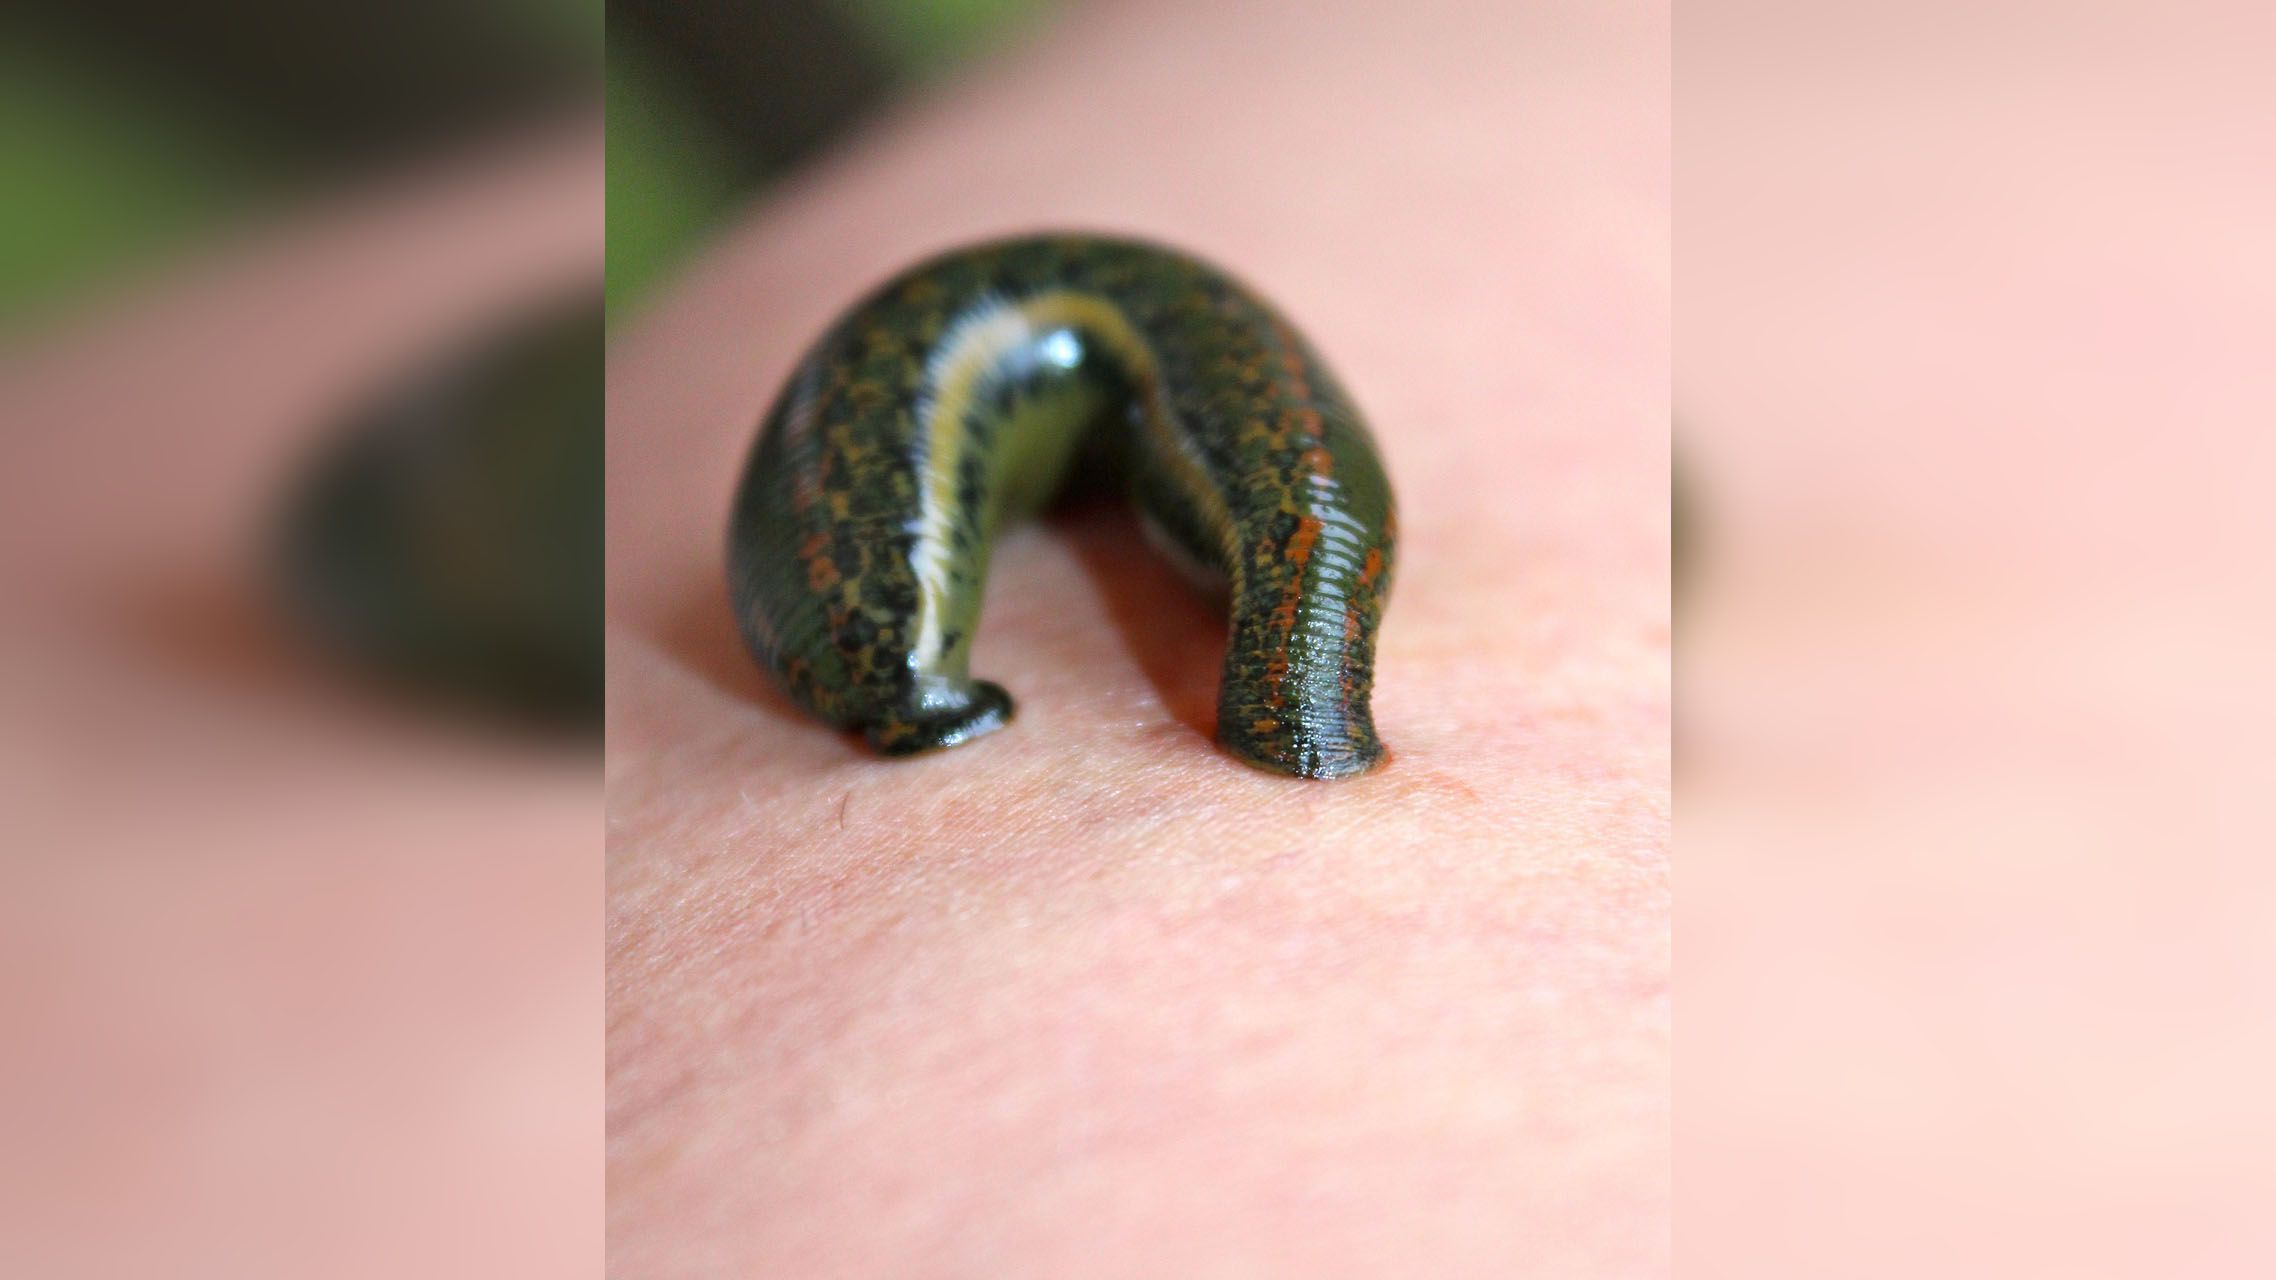 New species of leech with 3 jaws, almost 60 teeth found in Maryland swamp –  WSB-TV Channel 2 - Atlanta